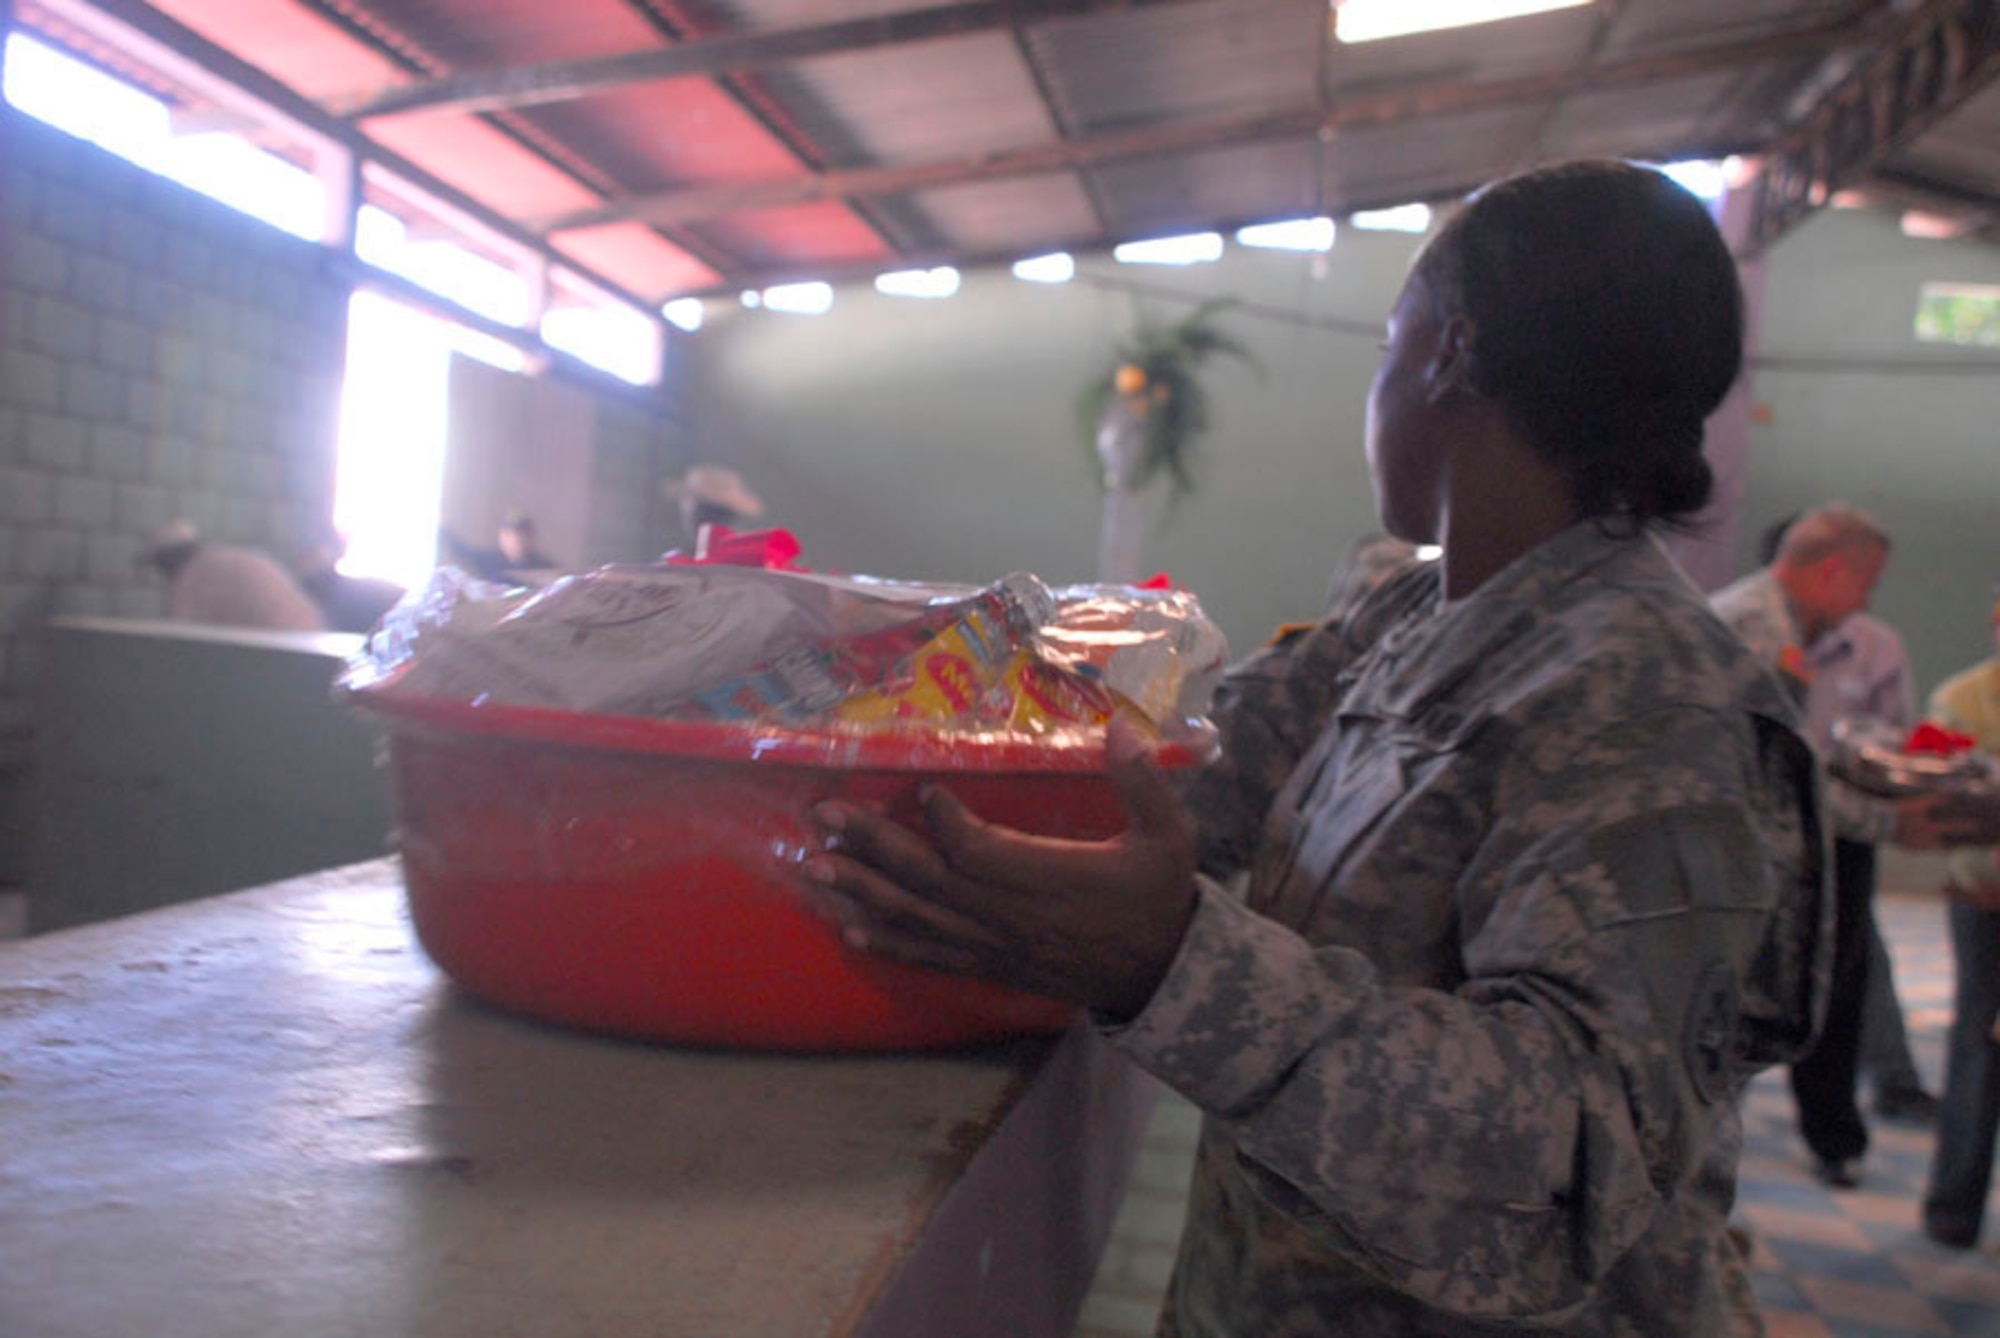 AJUTERIQUE, Honduras - Army Staff Sgt. Jenise Harris, Joint Task Force-Bravo, assists moving food baskets to be given out to more than 100 families here Dec. 9. JTF-Bravo and U.S. Southern Command gave the baskets filled with essential food and supplies to families affected by widespread flooding recently. (U.S. Air Force photo by Staff Sgt. Joel Mease)